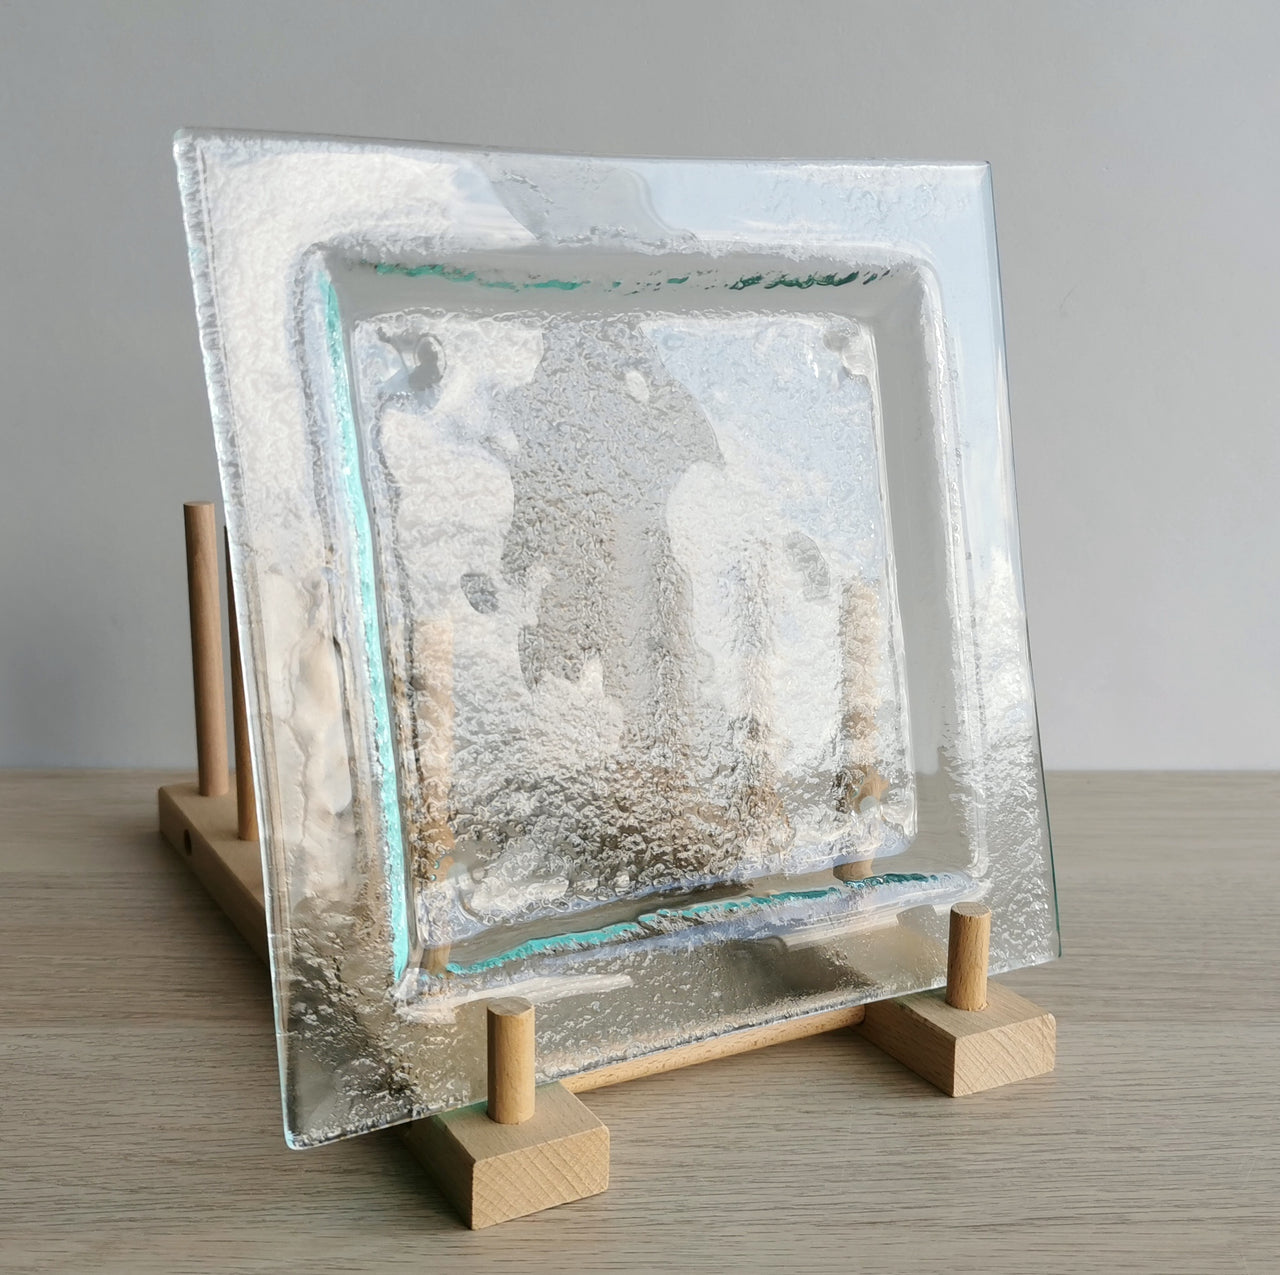 New York Minimalist Clear Glass Charger Plate. Transparent Glass Plate - 7 11/16"x7 11/16" (19,5cm.x19,5cm.)